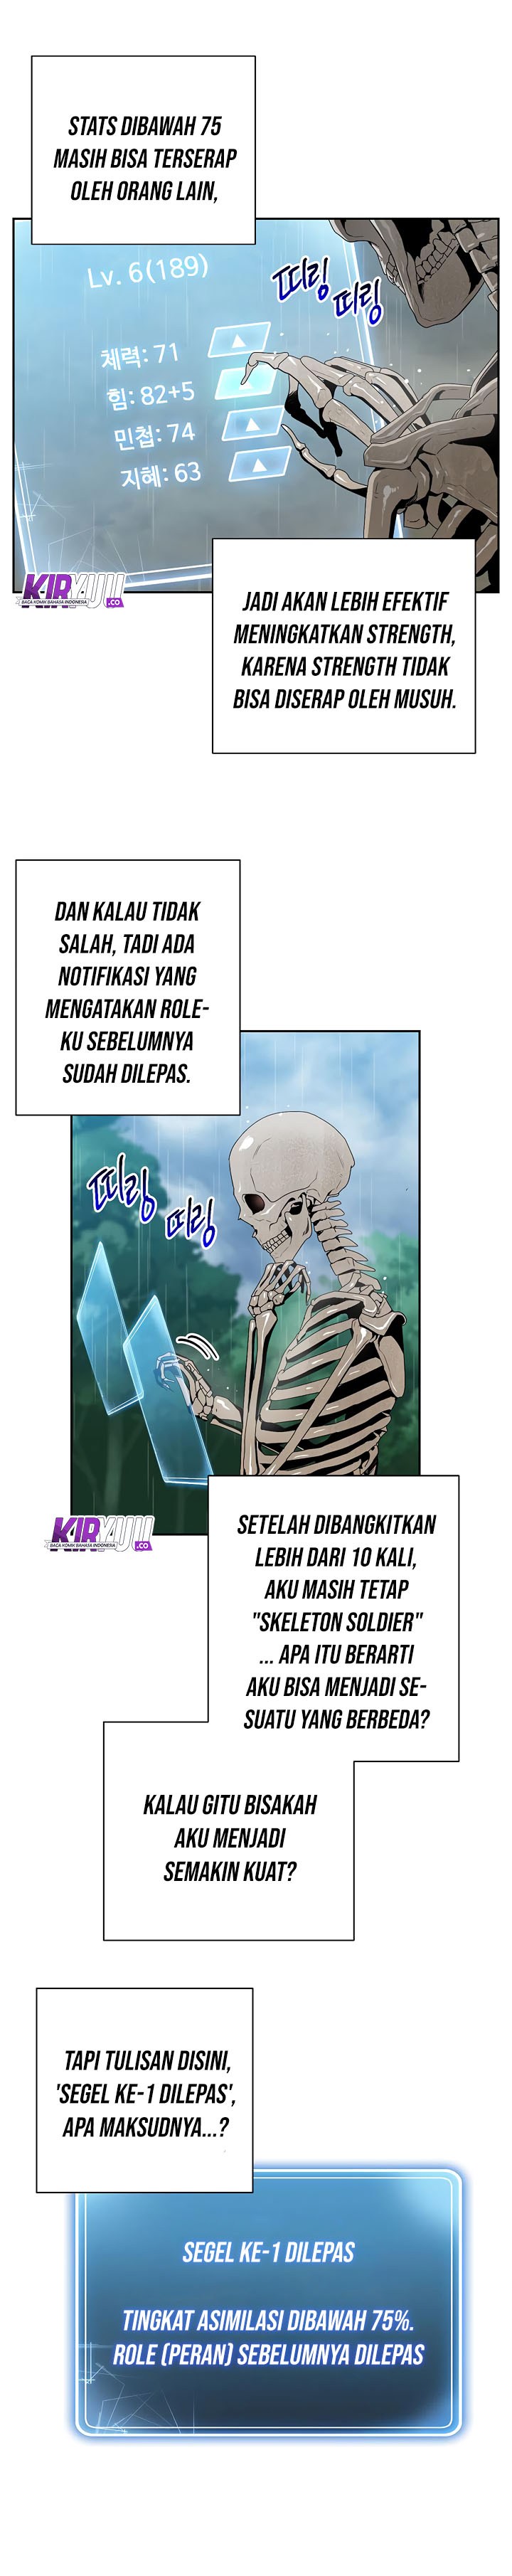 Skeleton Soldier Couldn’t Protect the Dungeon Chapter 88